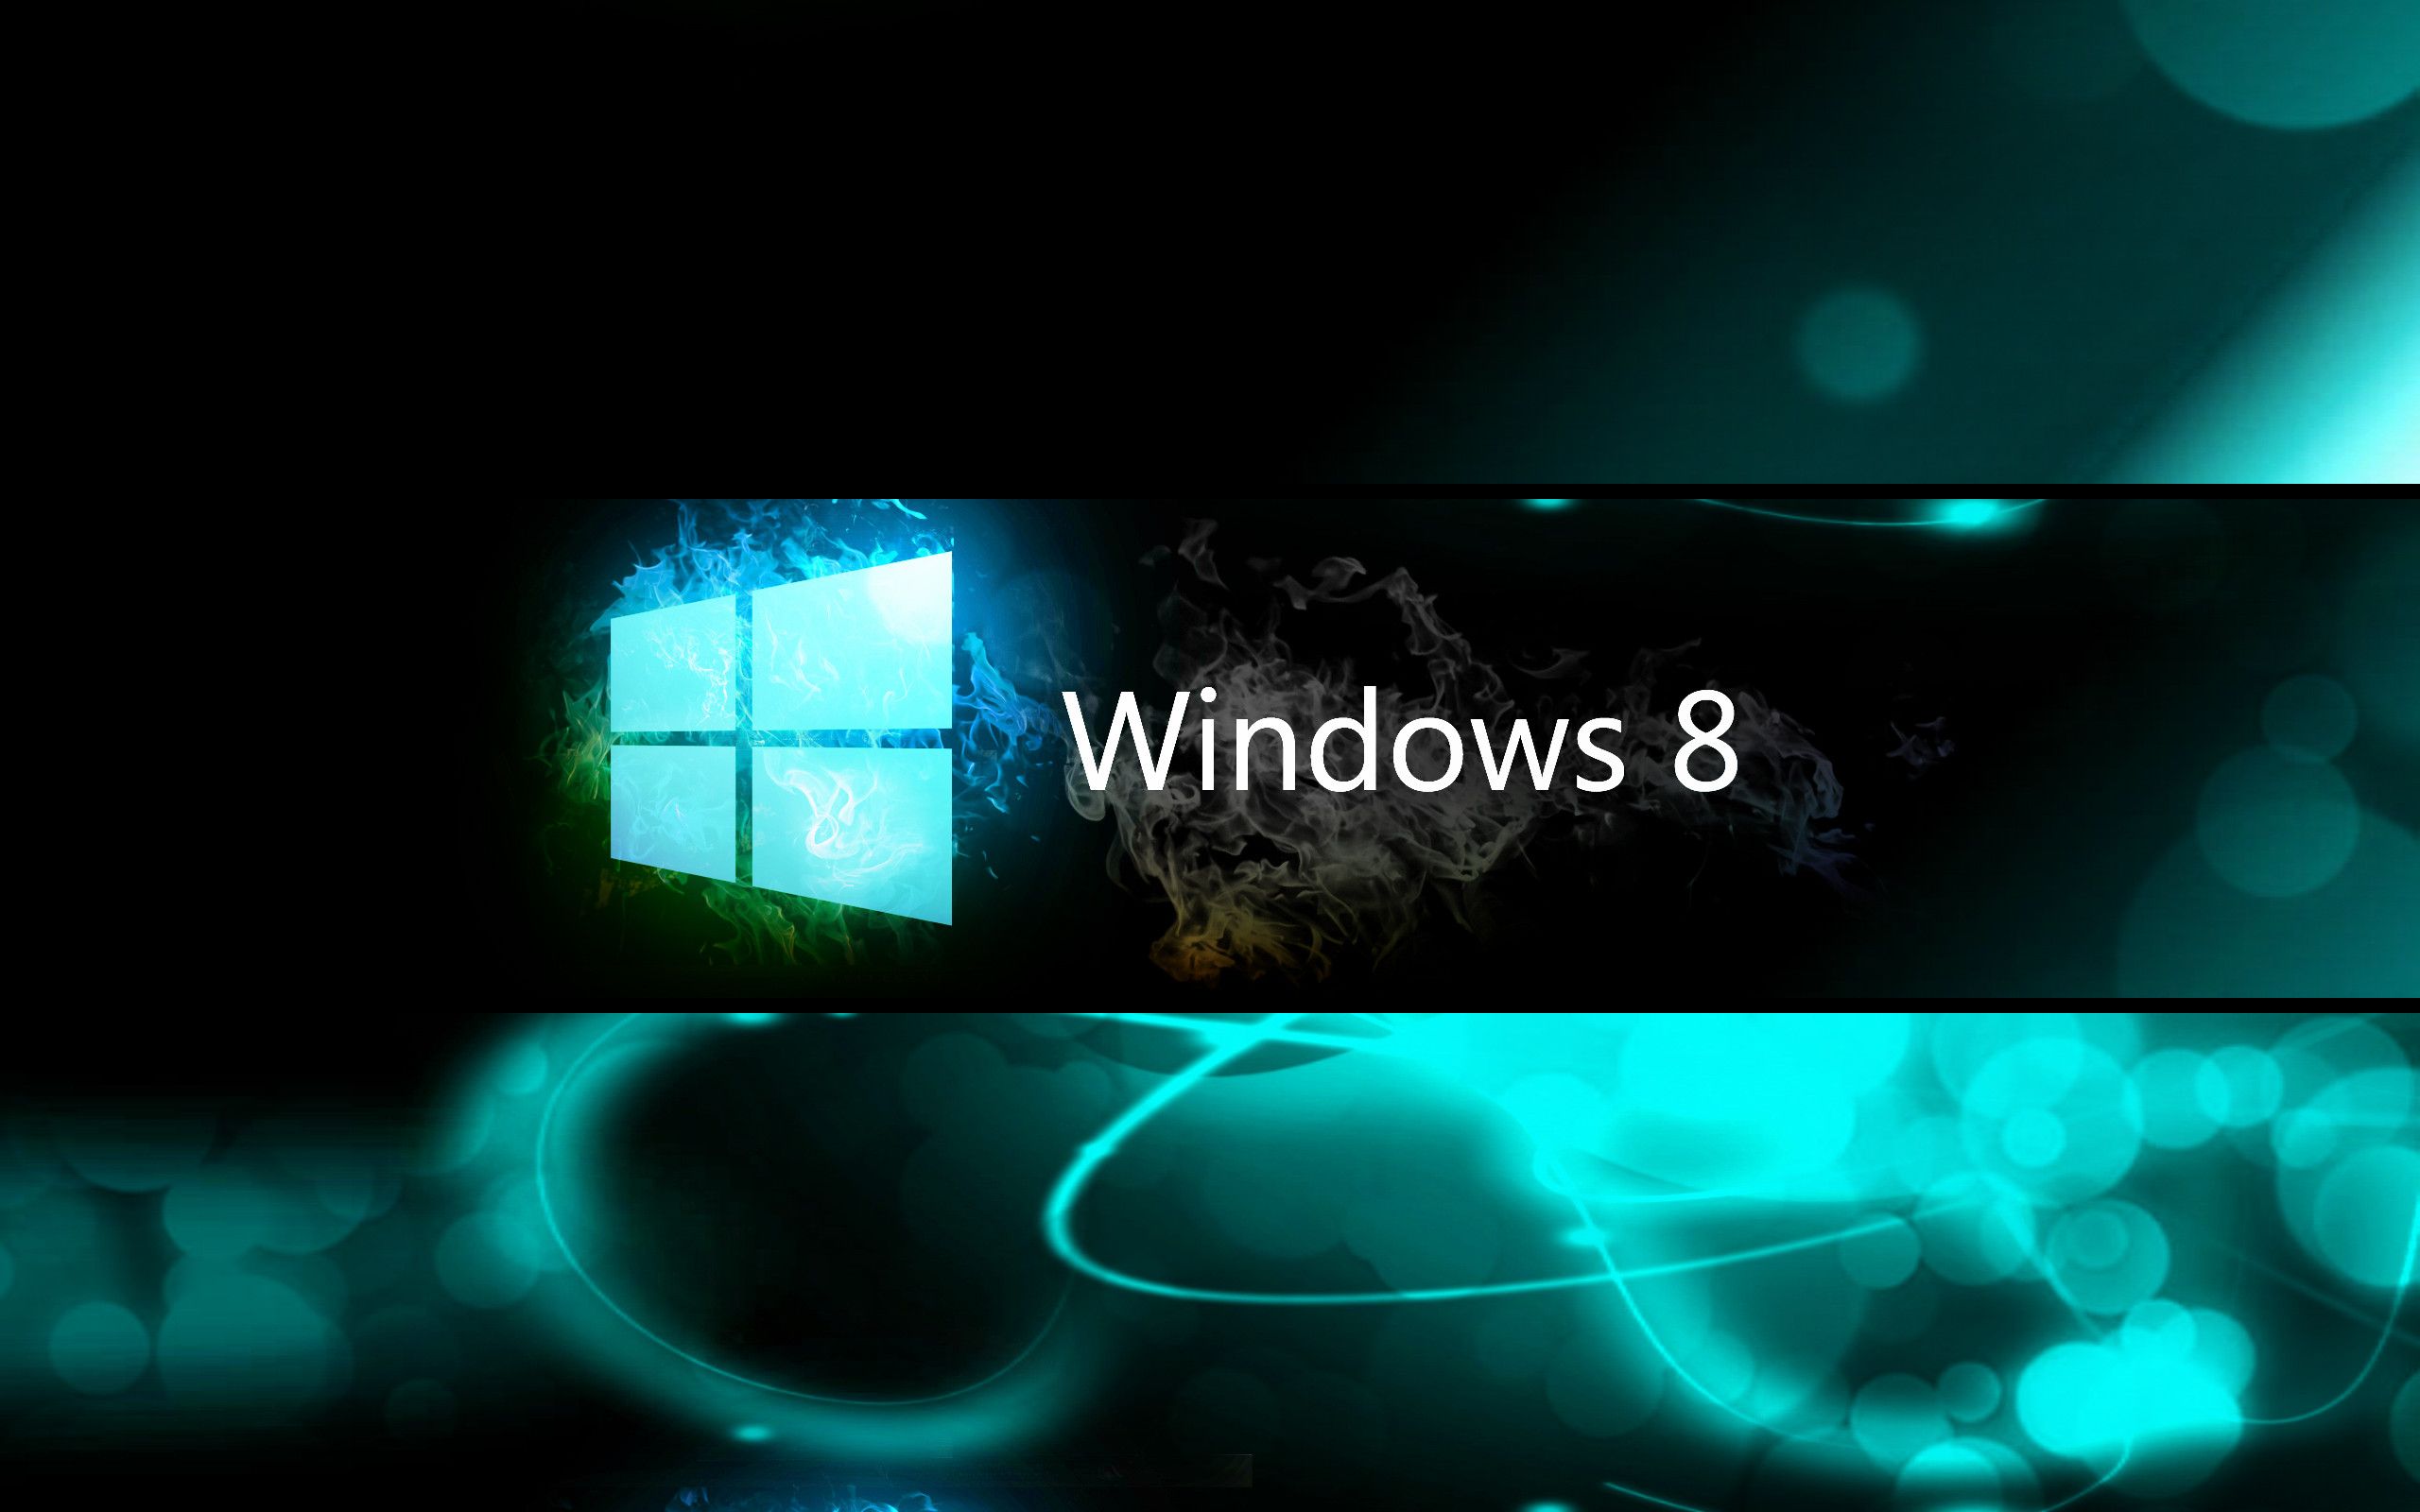 Windows 8 Background Image for PC Wallpaper cool wallpapers